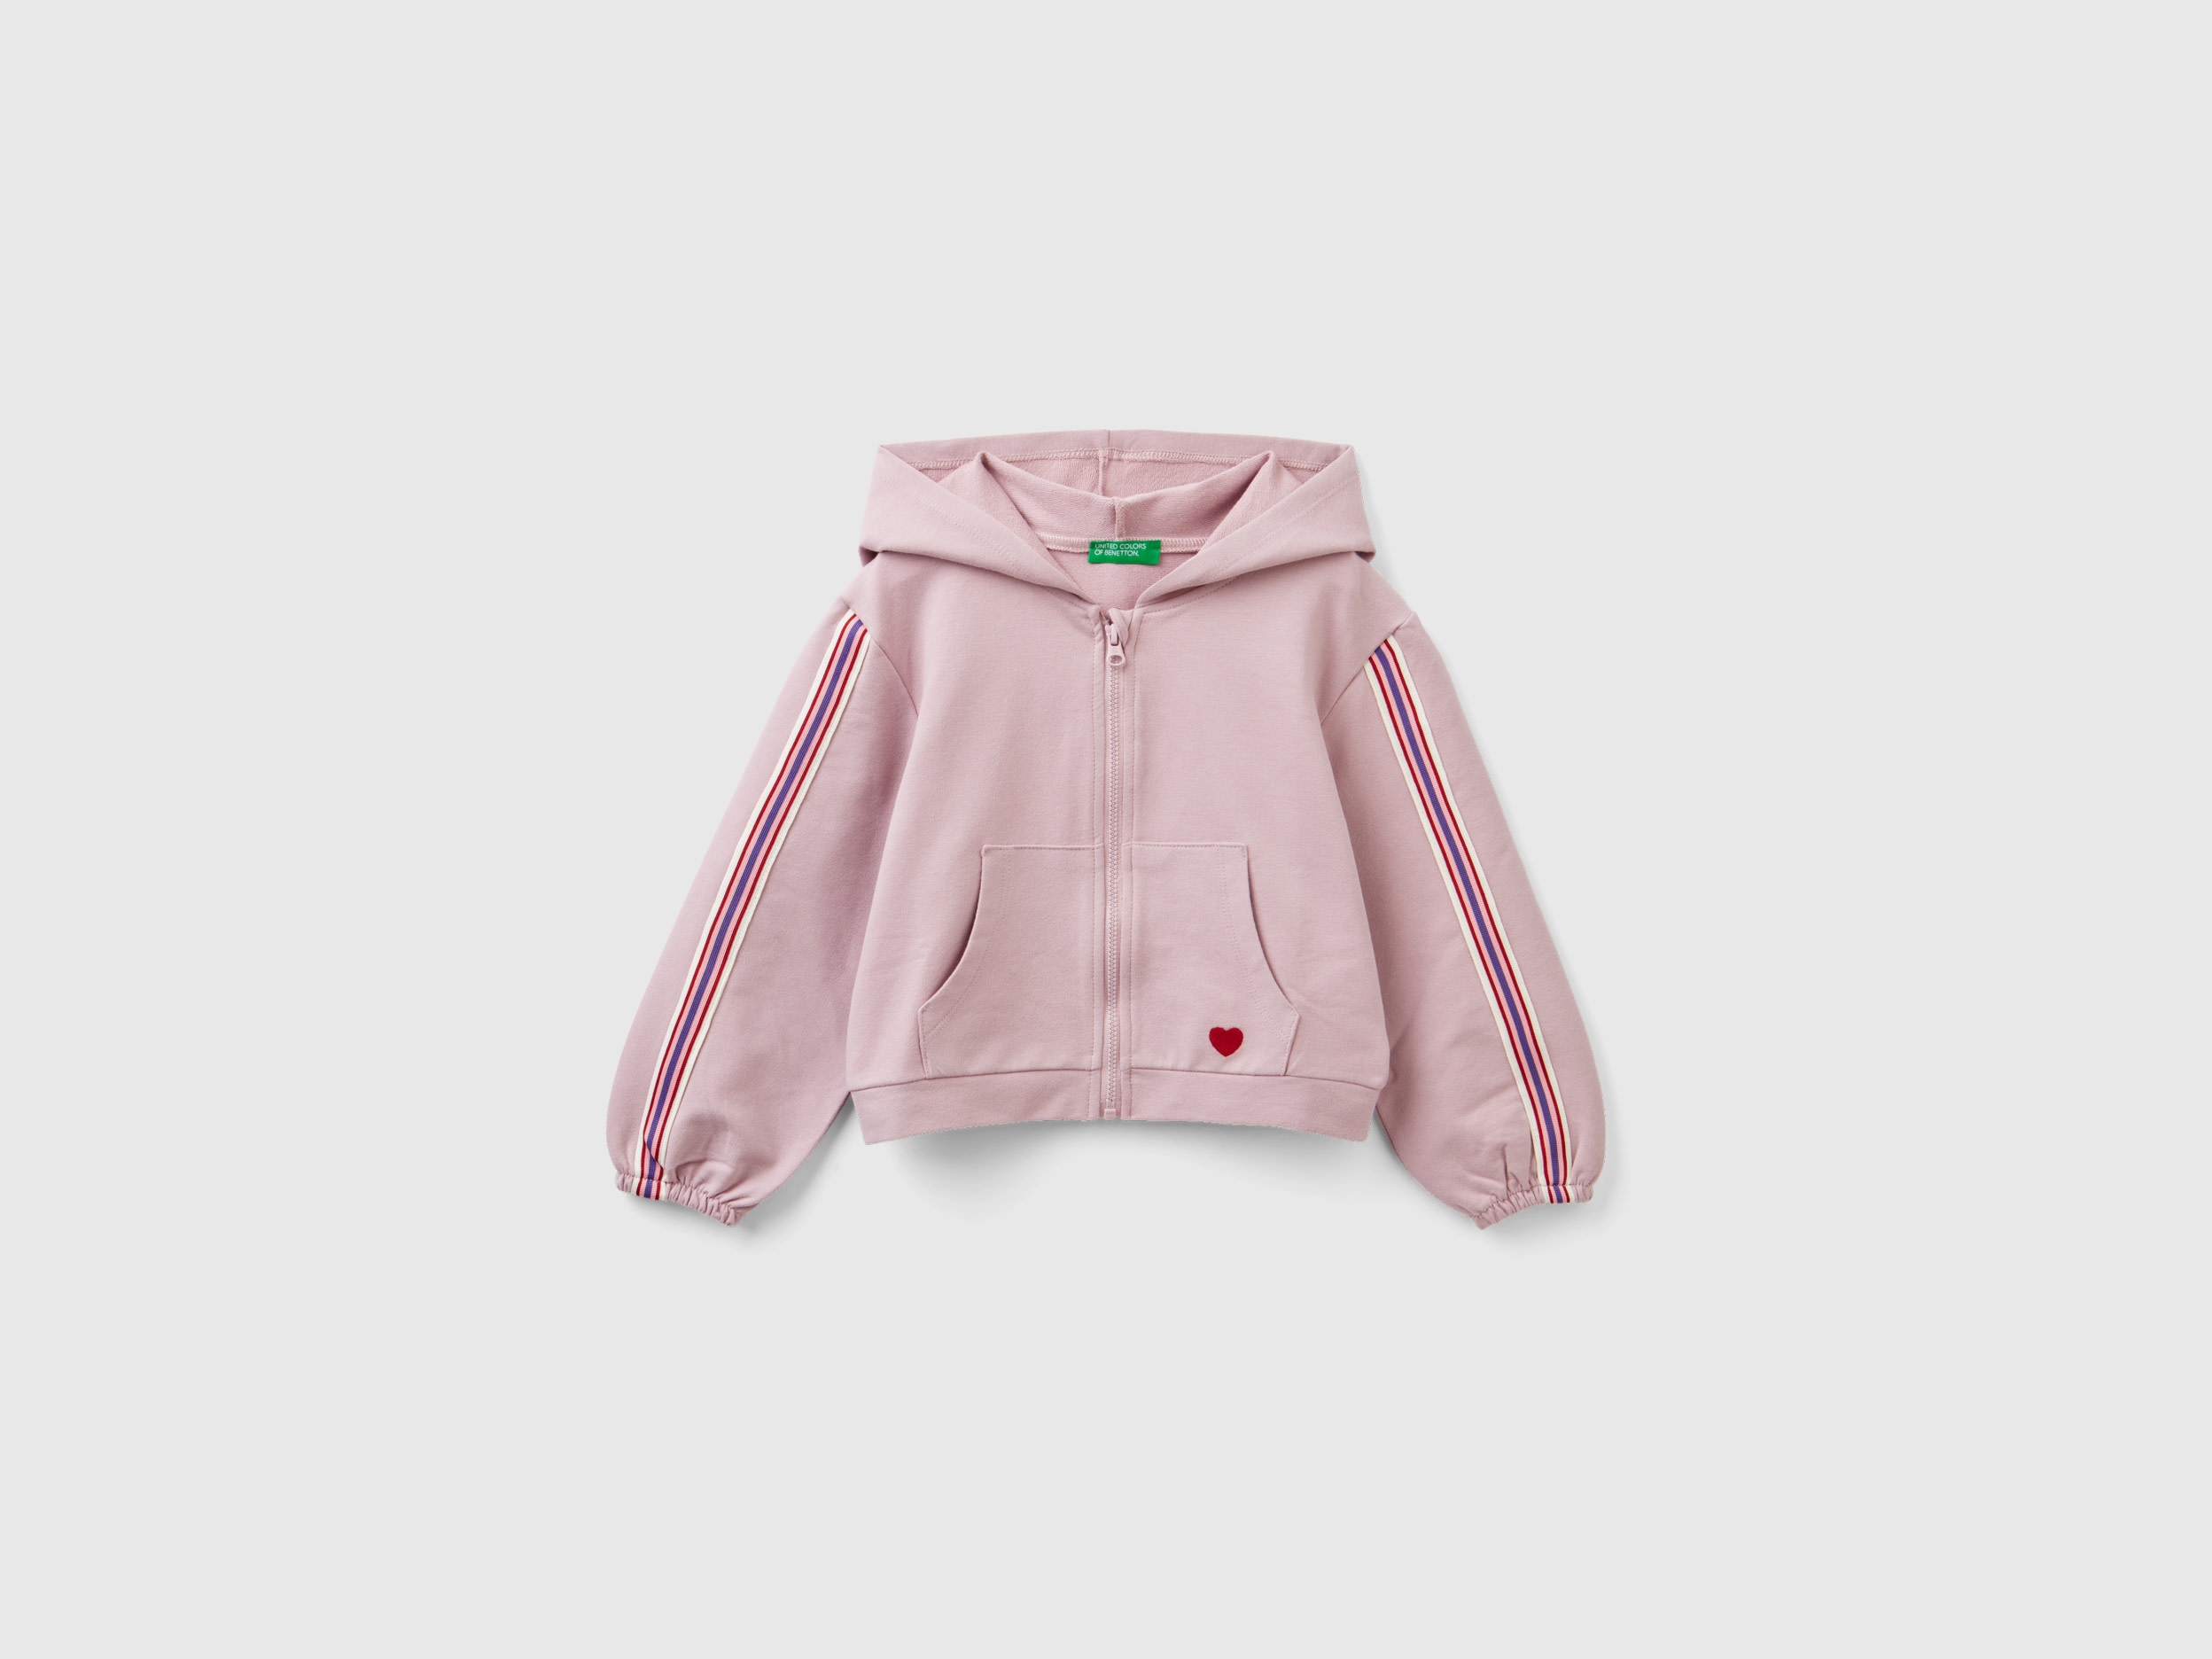 Benetton, Cropped Sweatshirt With Striped Details, size 12-18, Pink, Kids